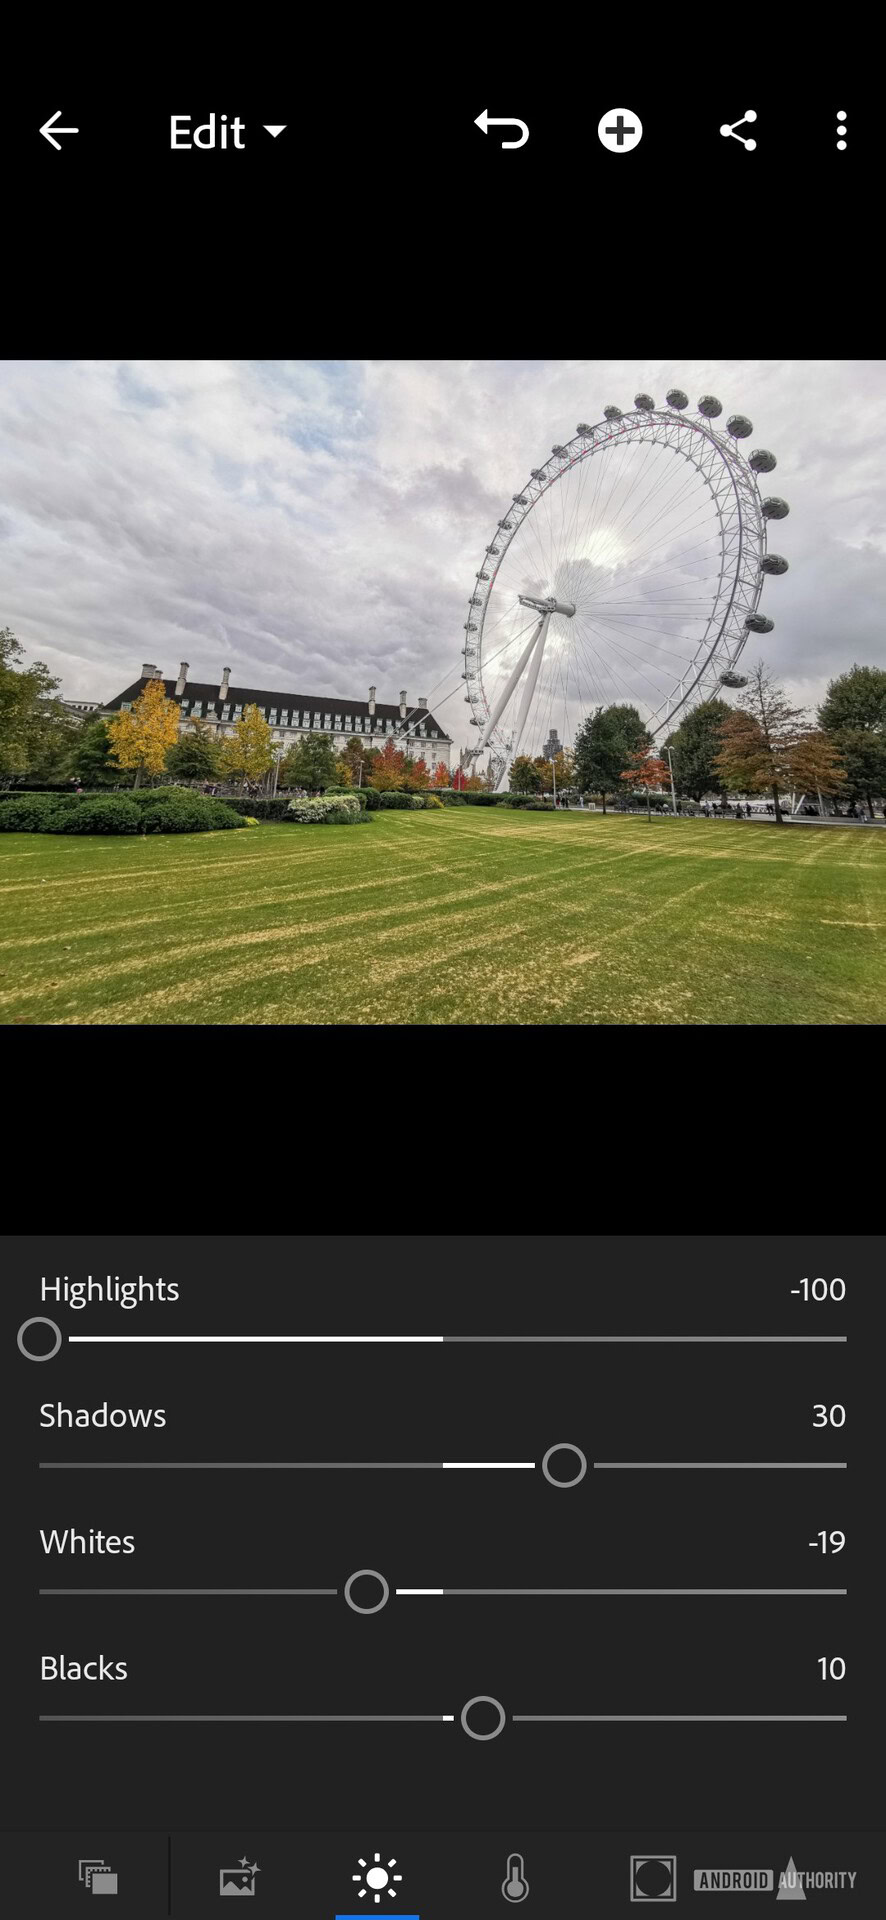 10 Adobe Lightroom Tips And Tricks Android Authority